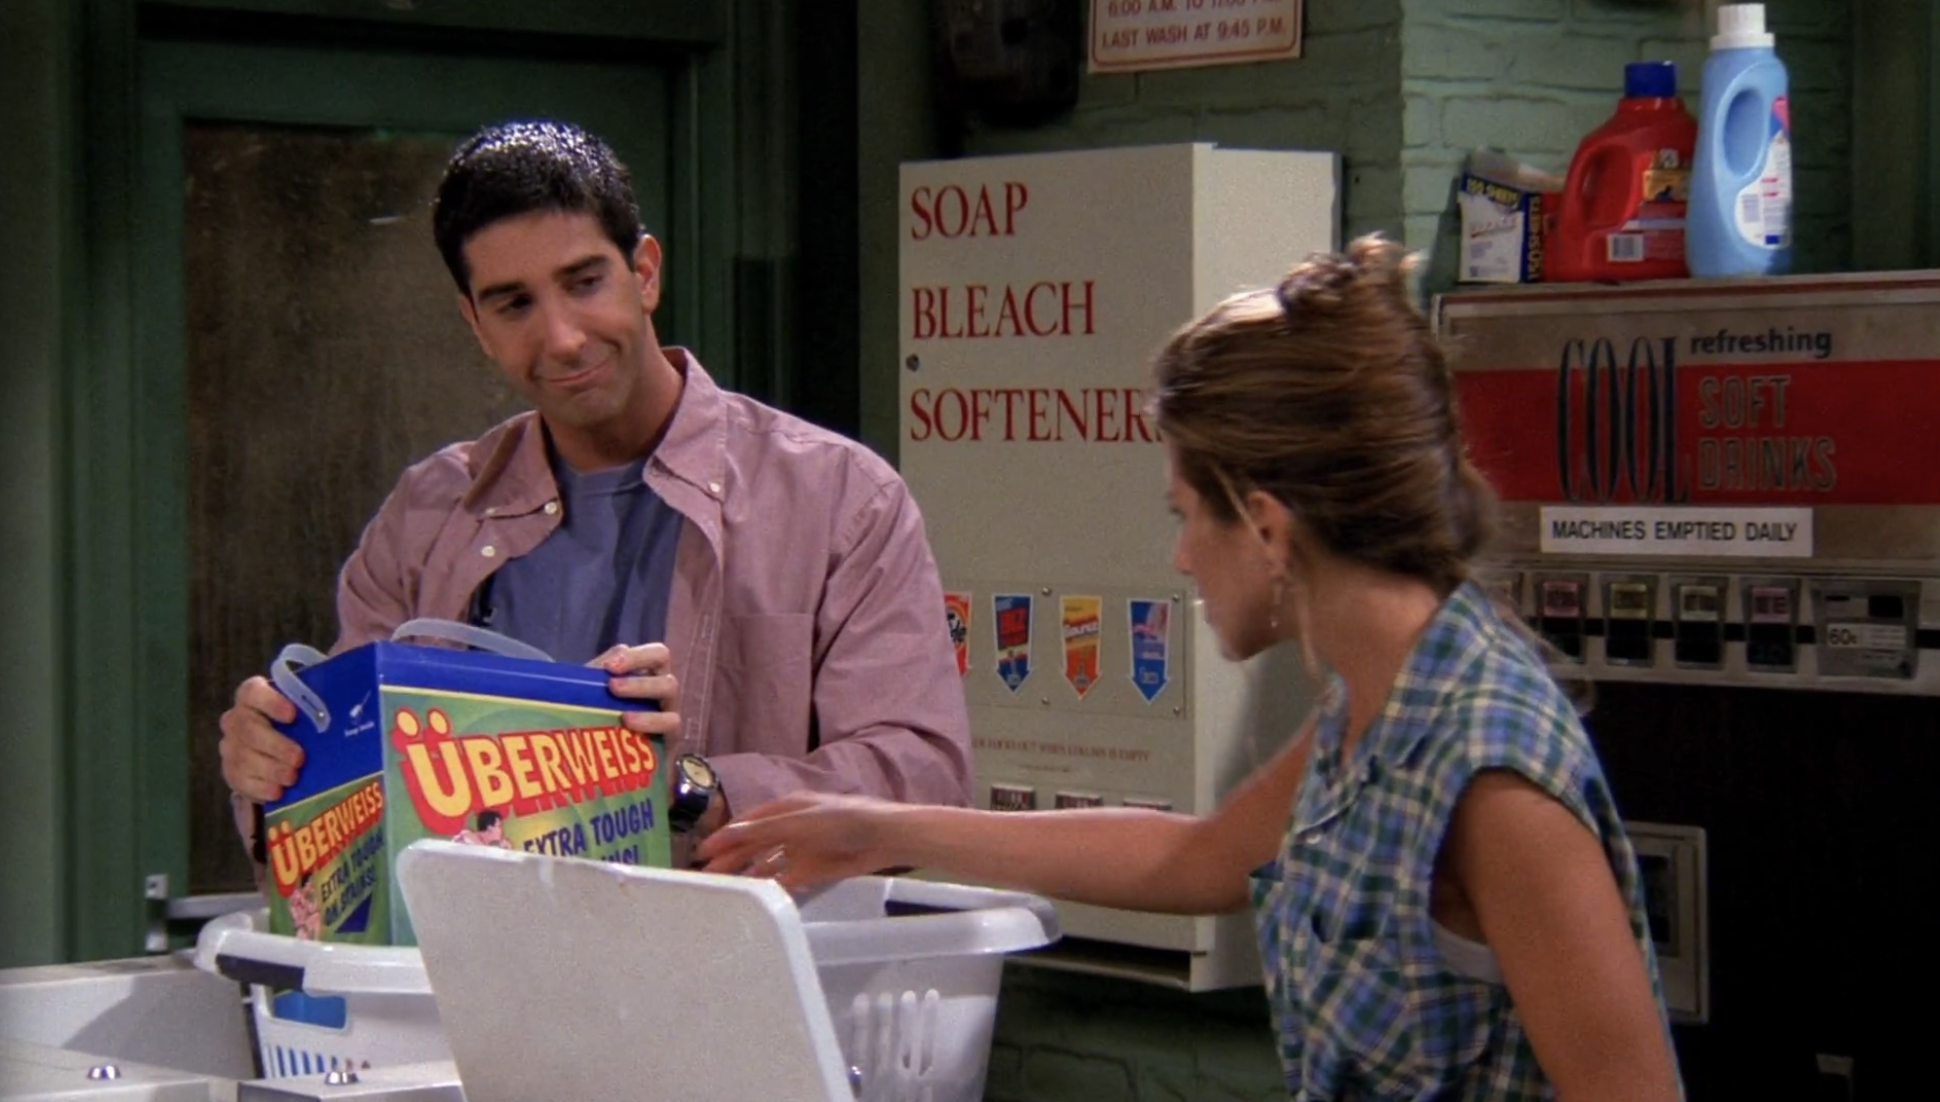 Ross holding uberweiss in a laundry basket in front of Rachel